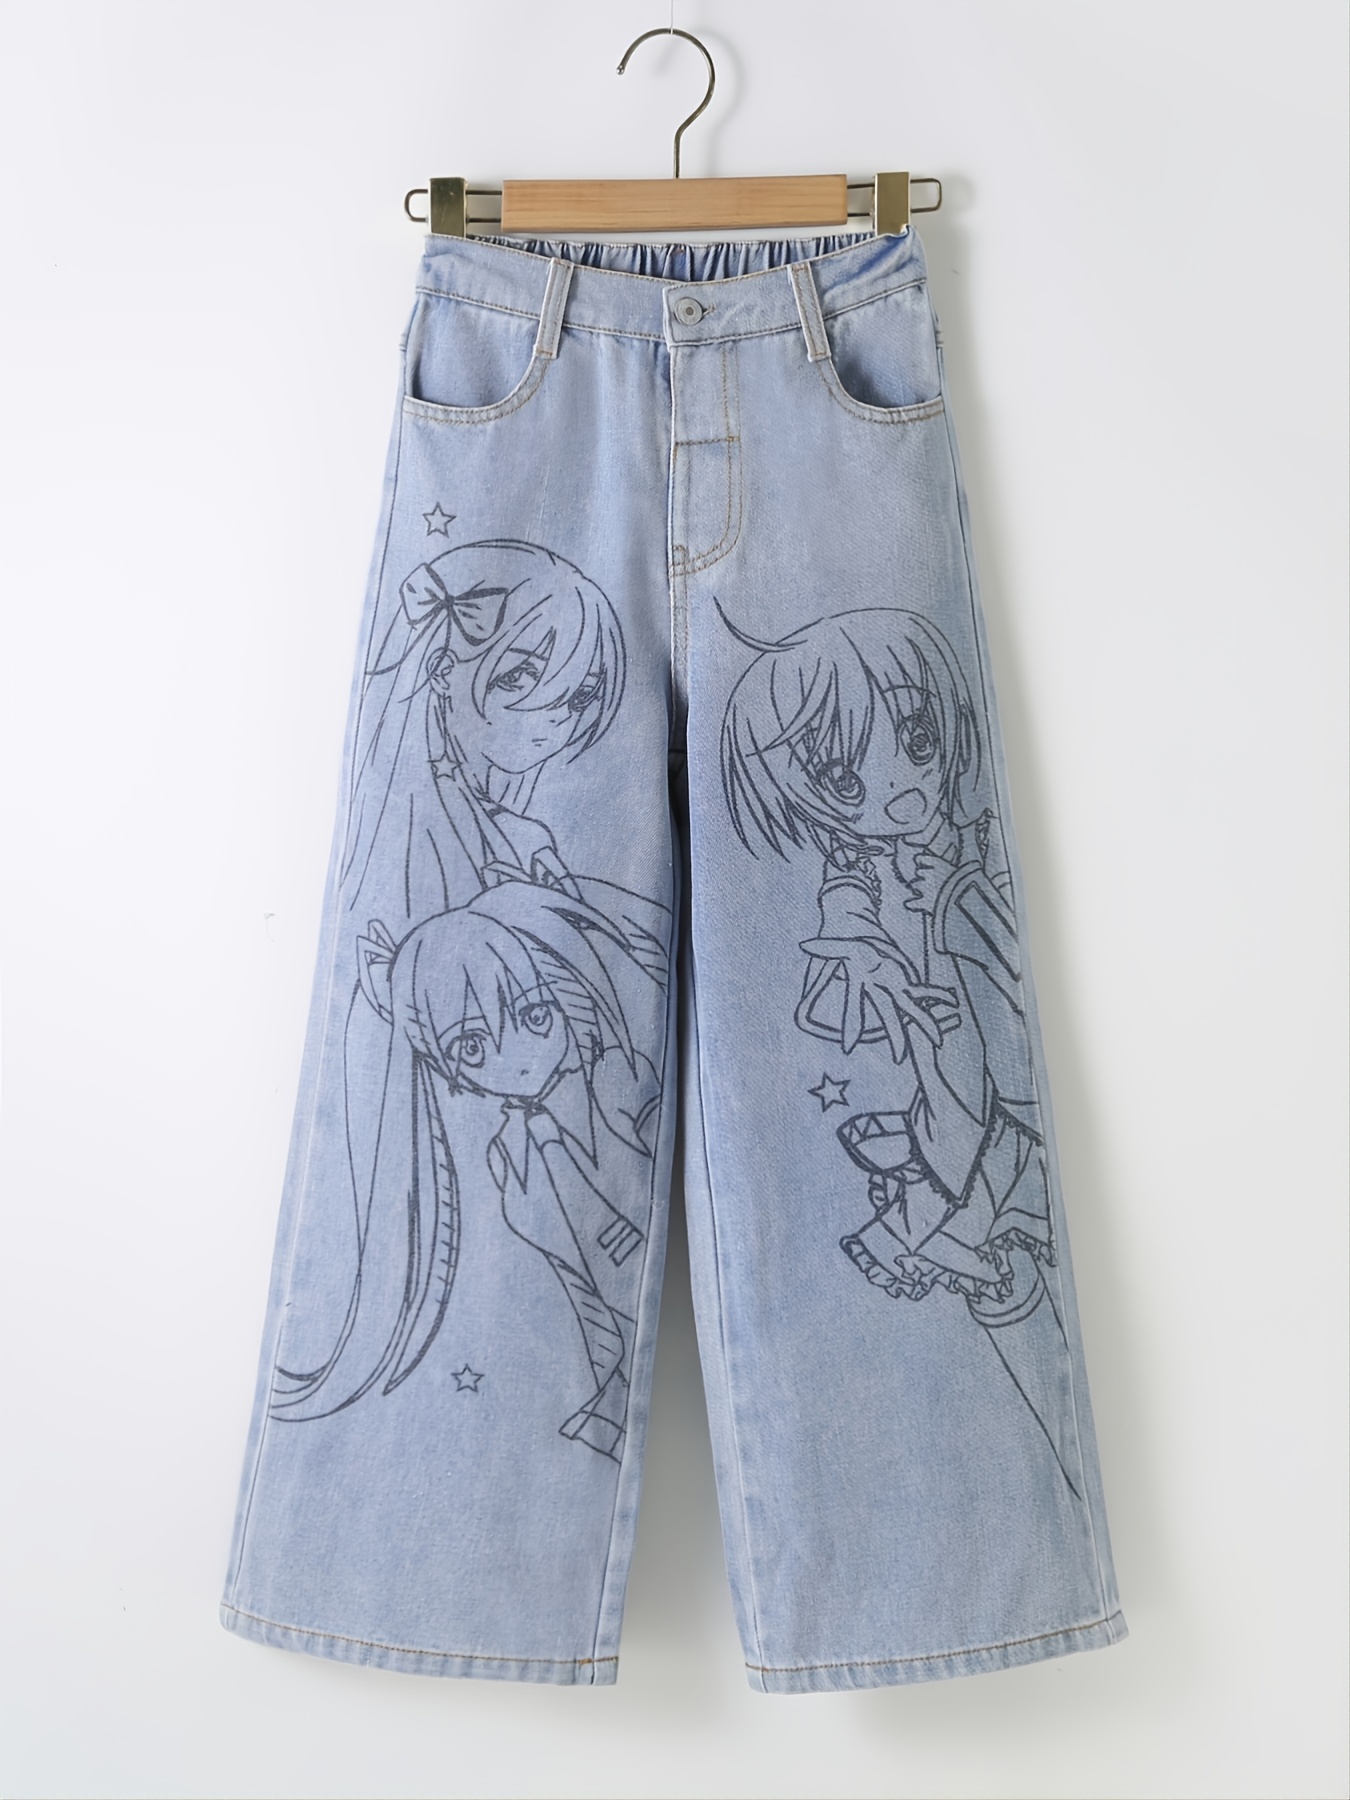 Irfan Ramlee  on X Levis custom anime pants is up for sale DM if  interested httpstco8AgdNGdMEU  X